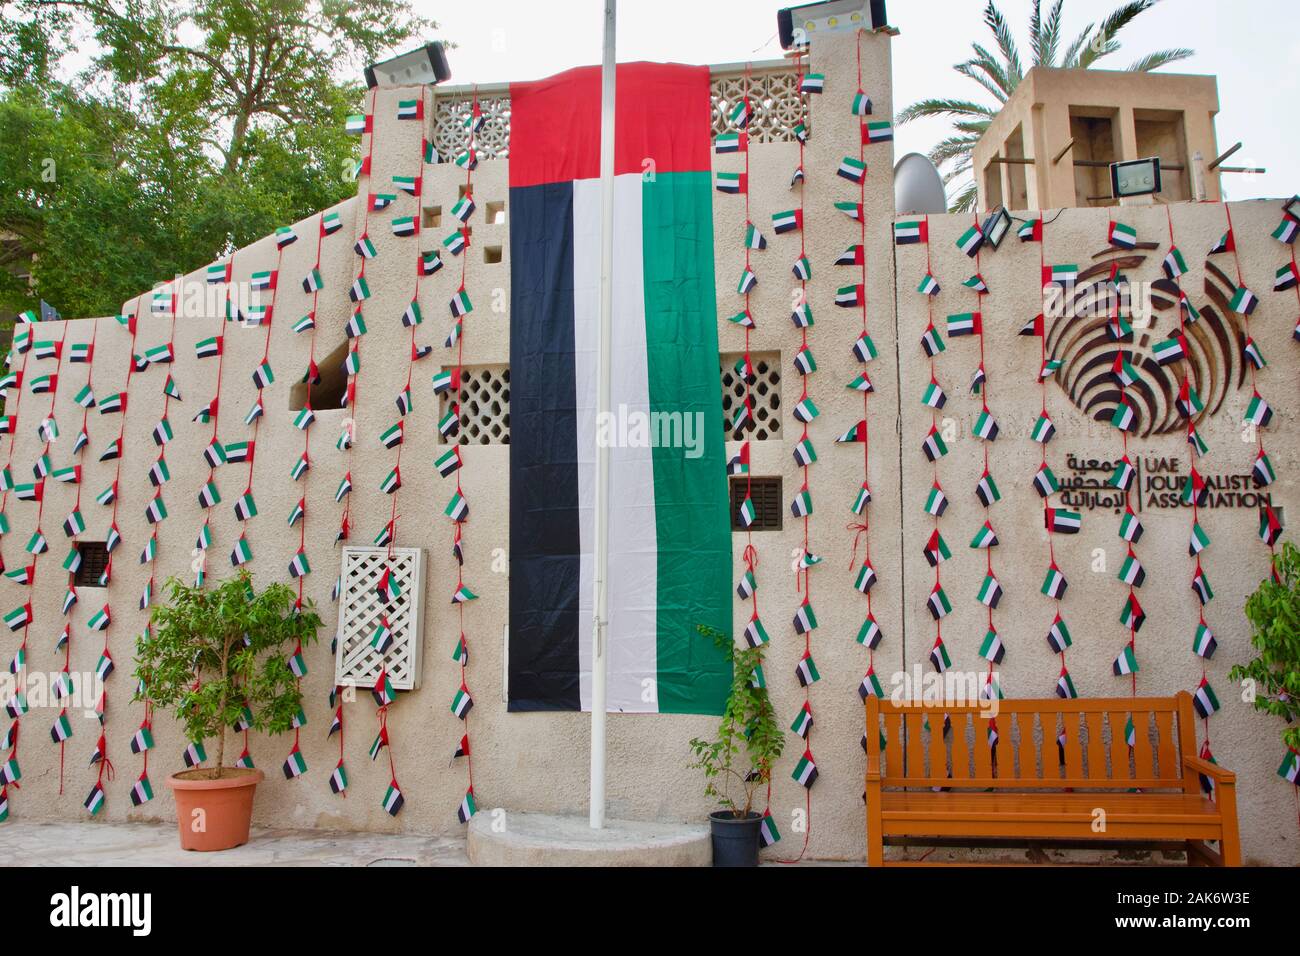 UAE Journalists Association in Dubai decorated with the UAE flag Stock Photo